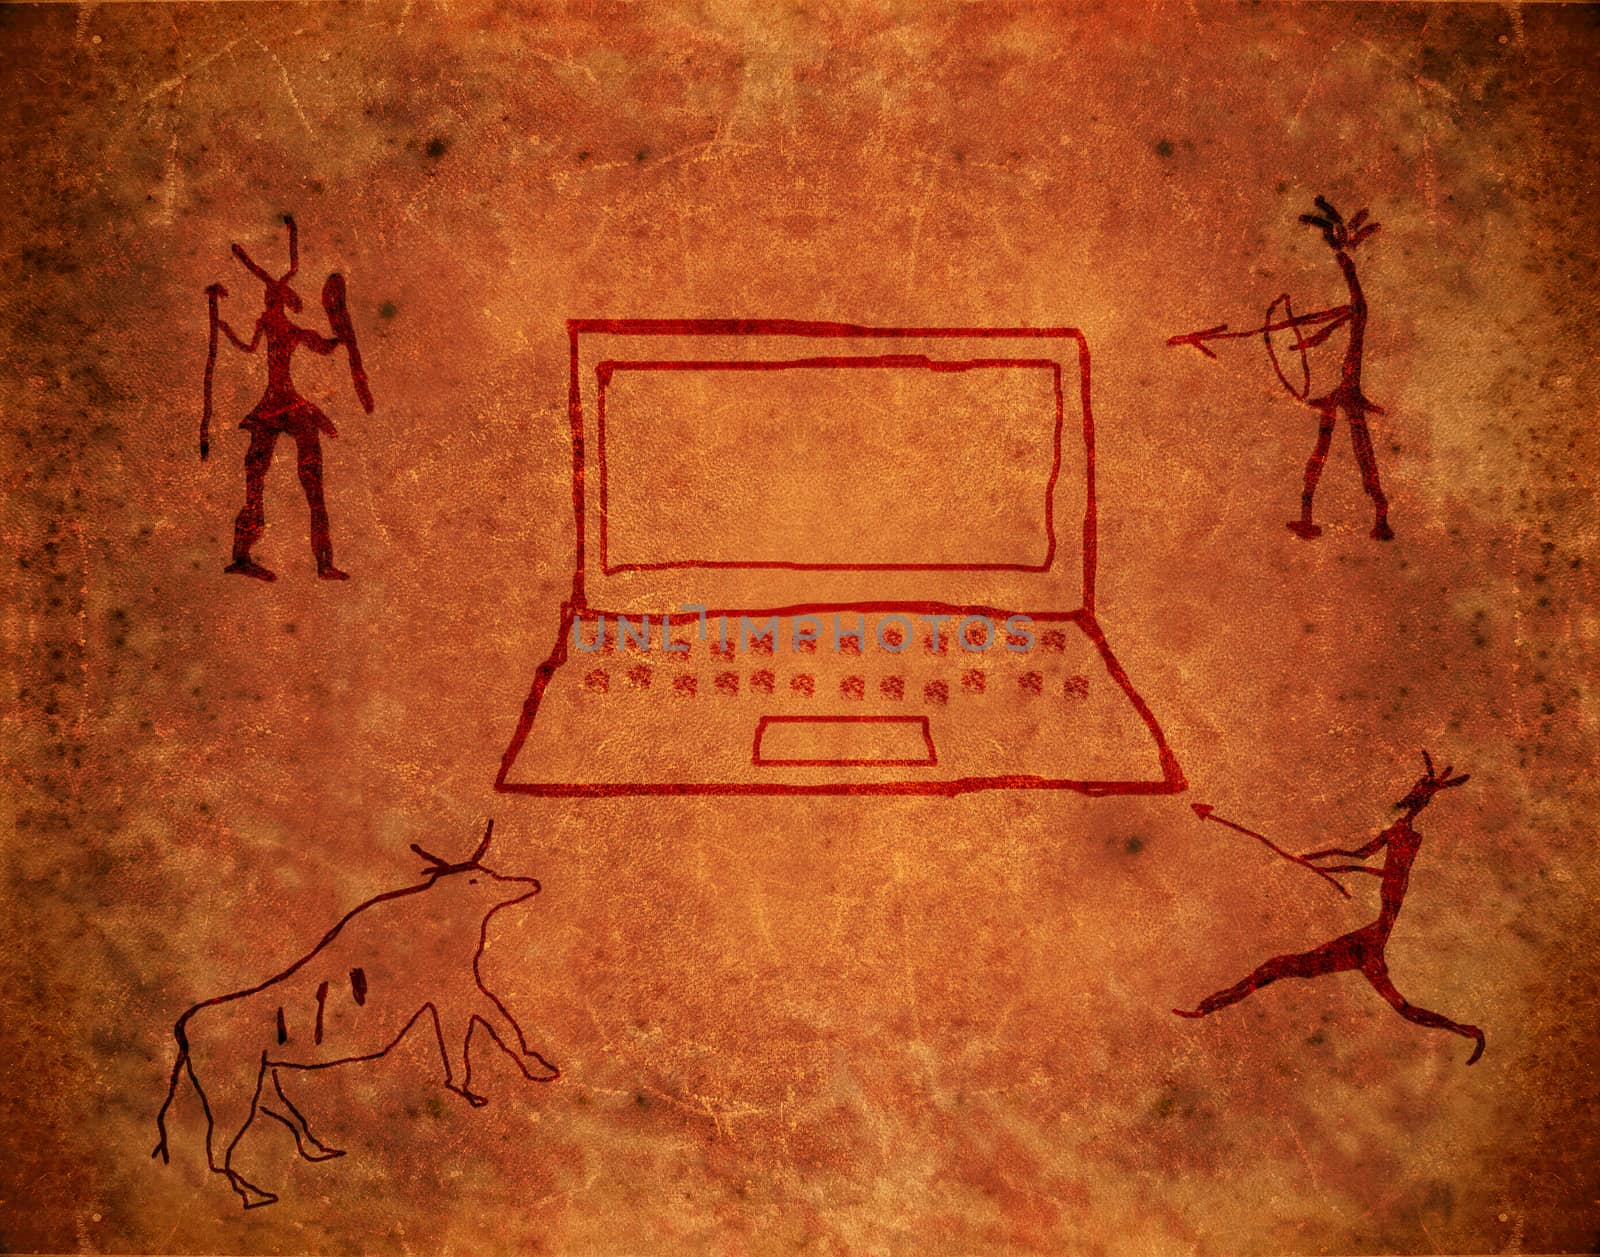 prehistoric paint on brown grunge background with notebook and hunters